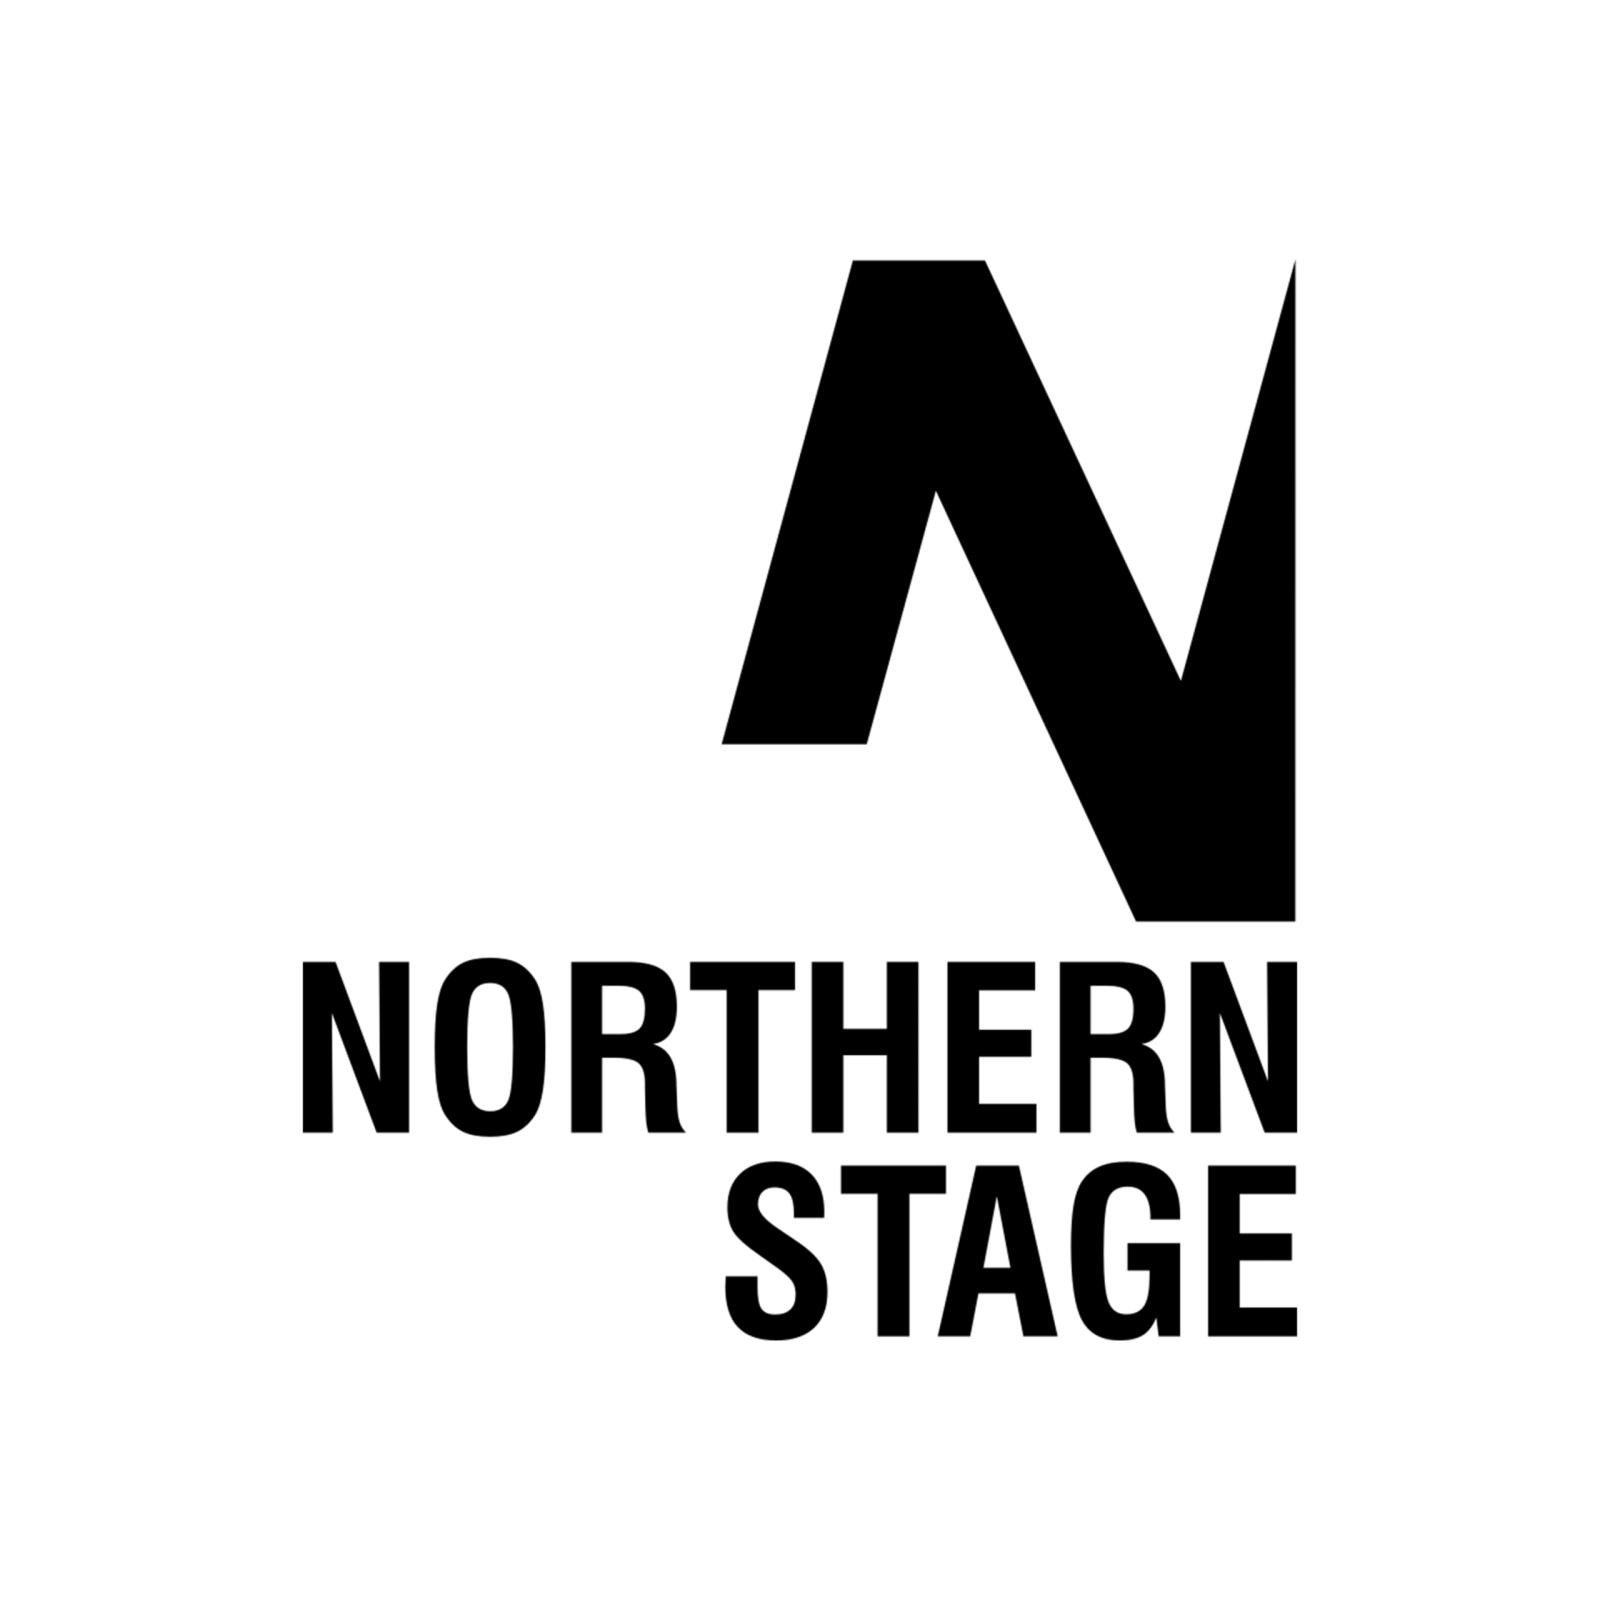 MA Directing & Theatre-Making Showcase, Collage <br>27th & 28th June 7pm <br>Northern Stage